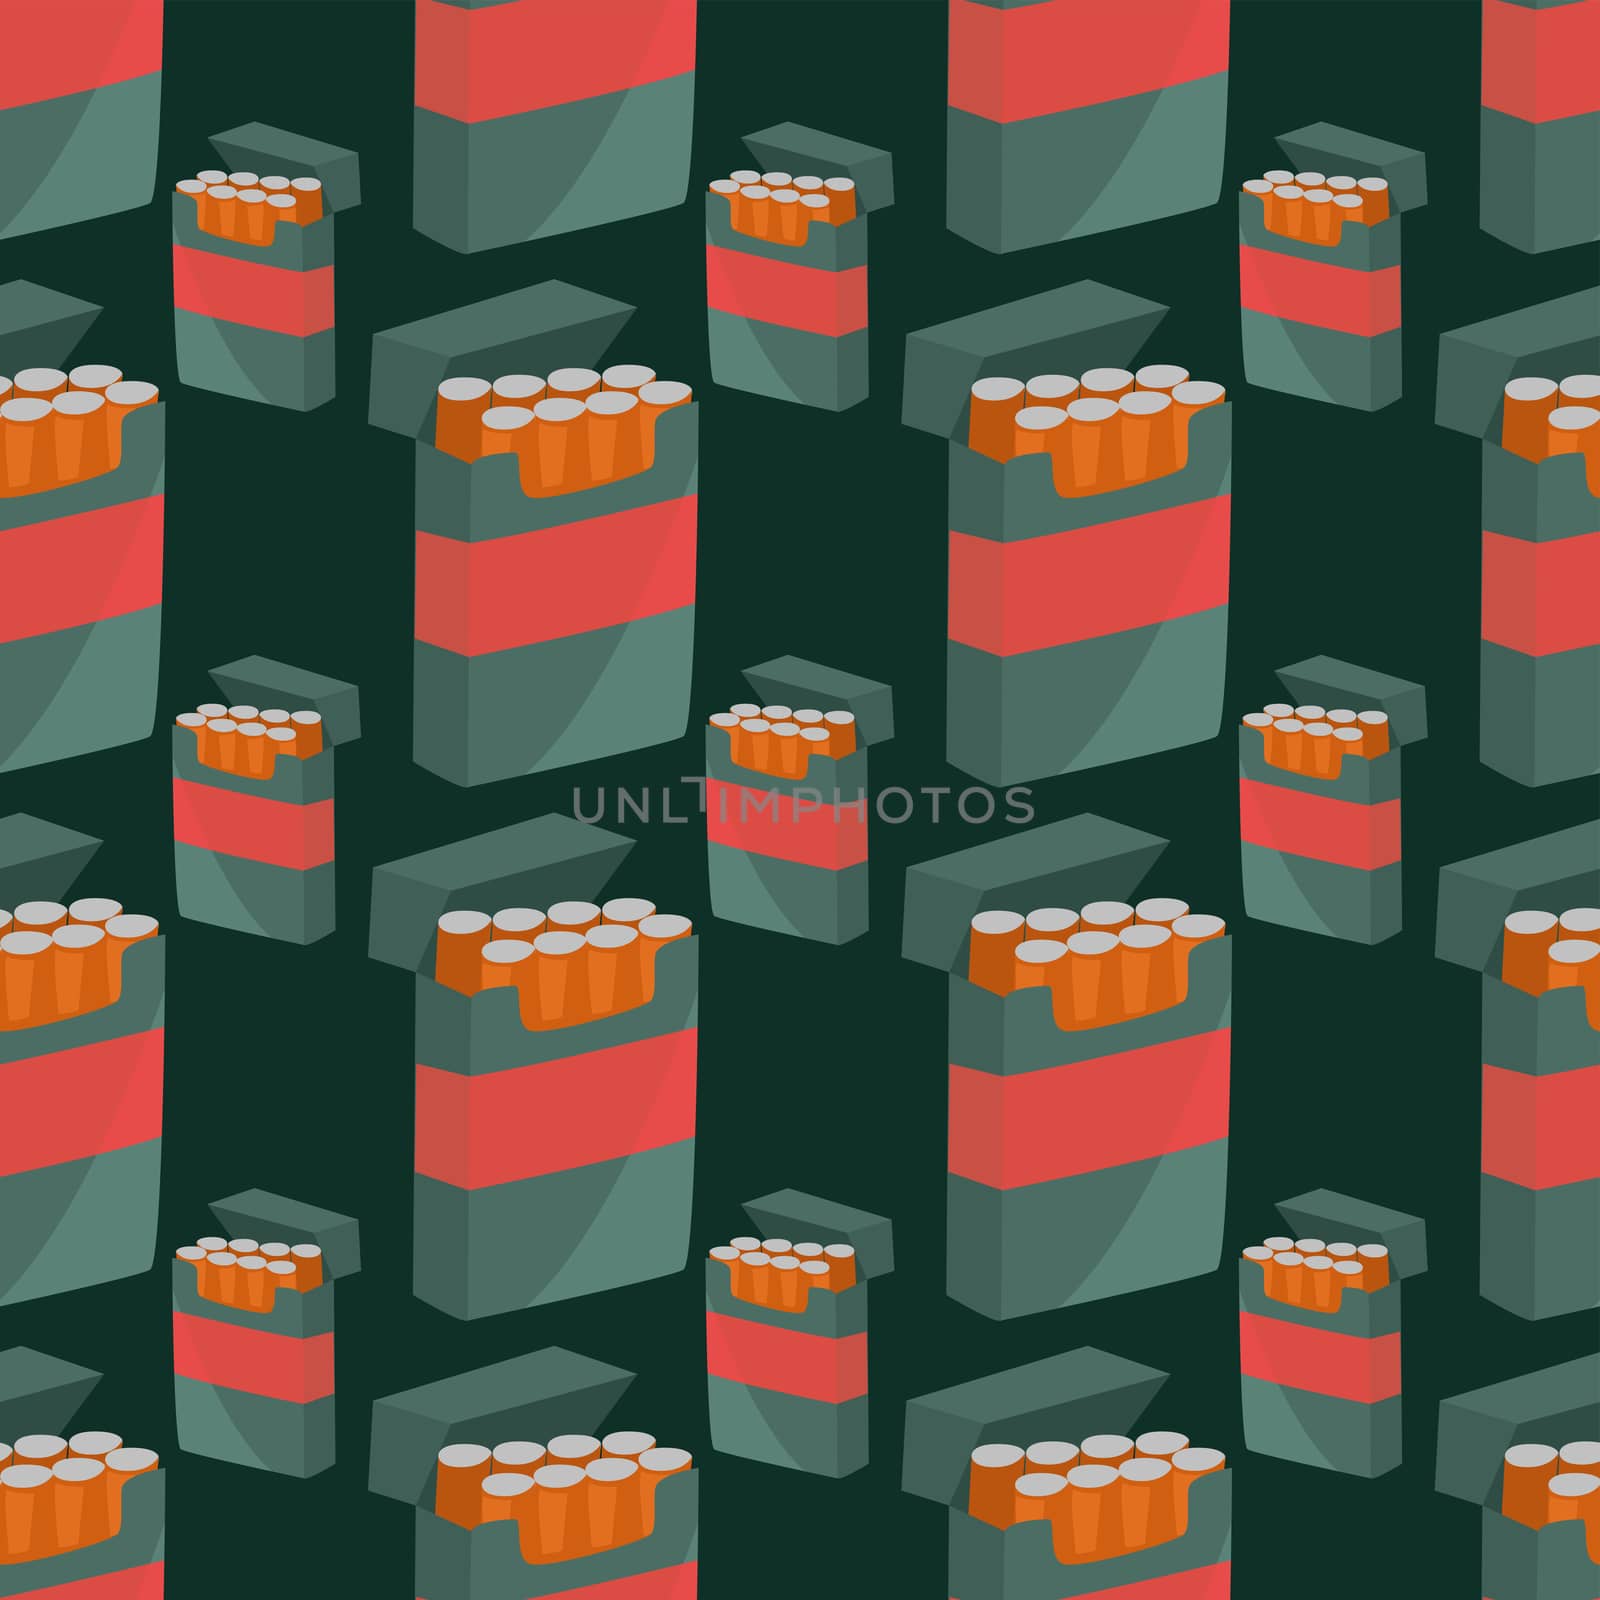 Pack of cigarettes pattern , illustration, vector on white background